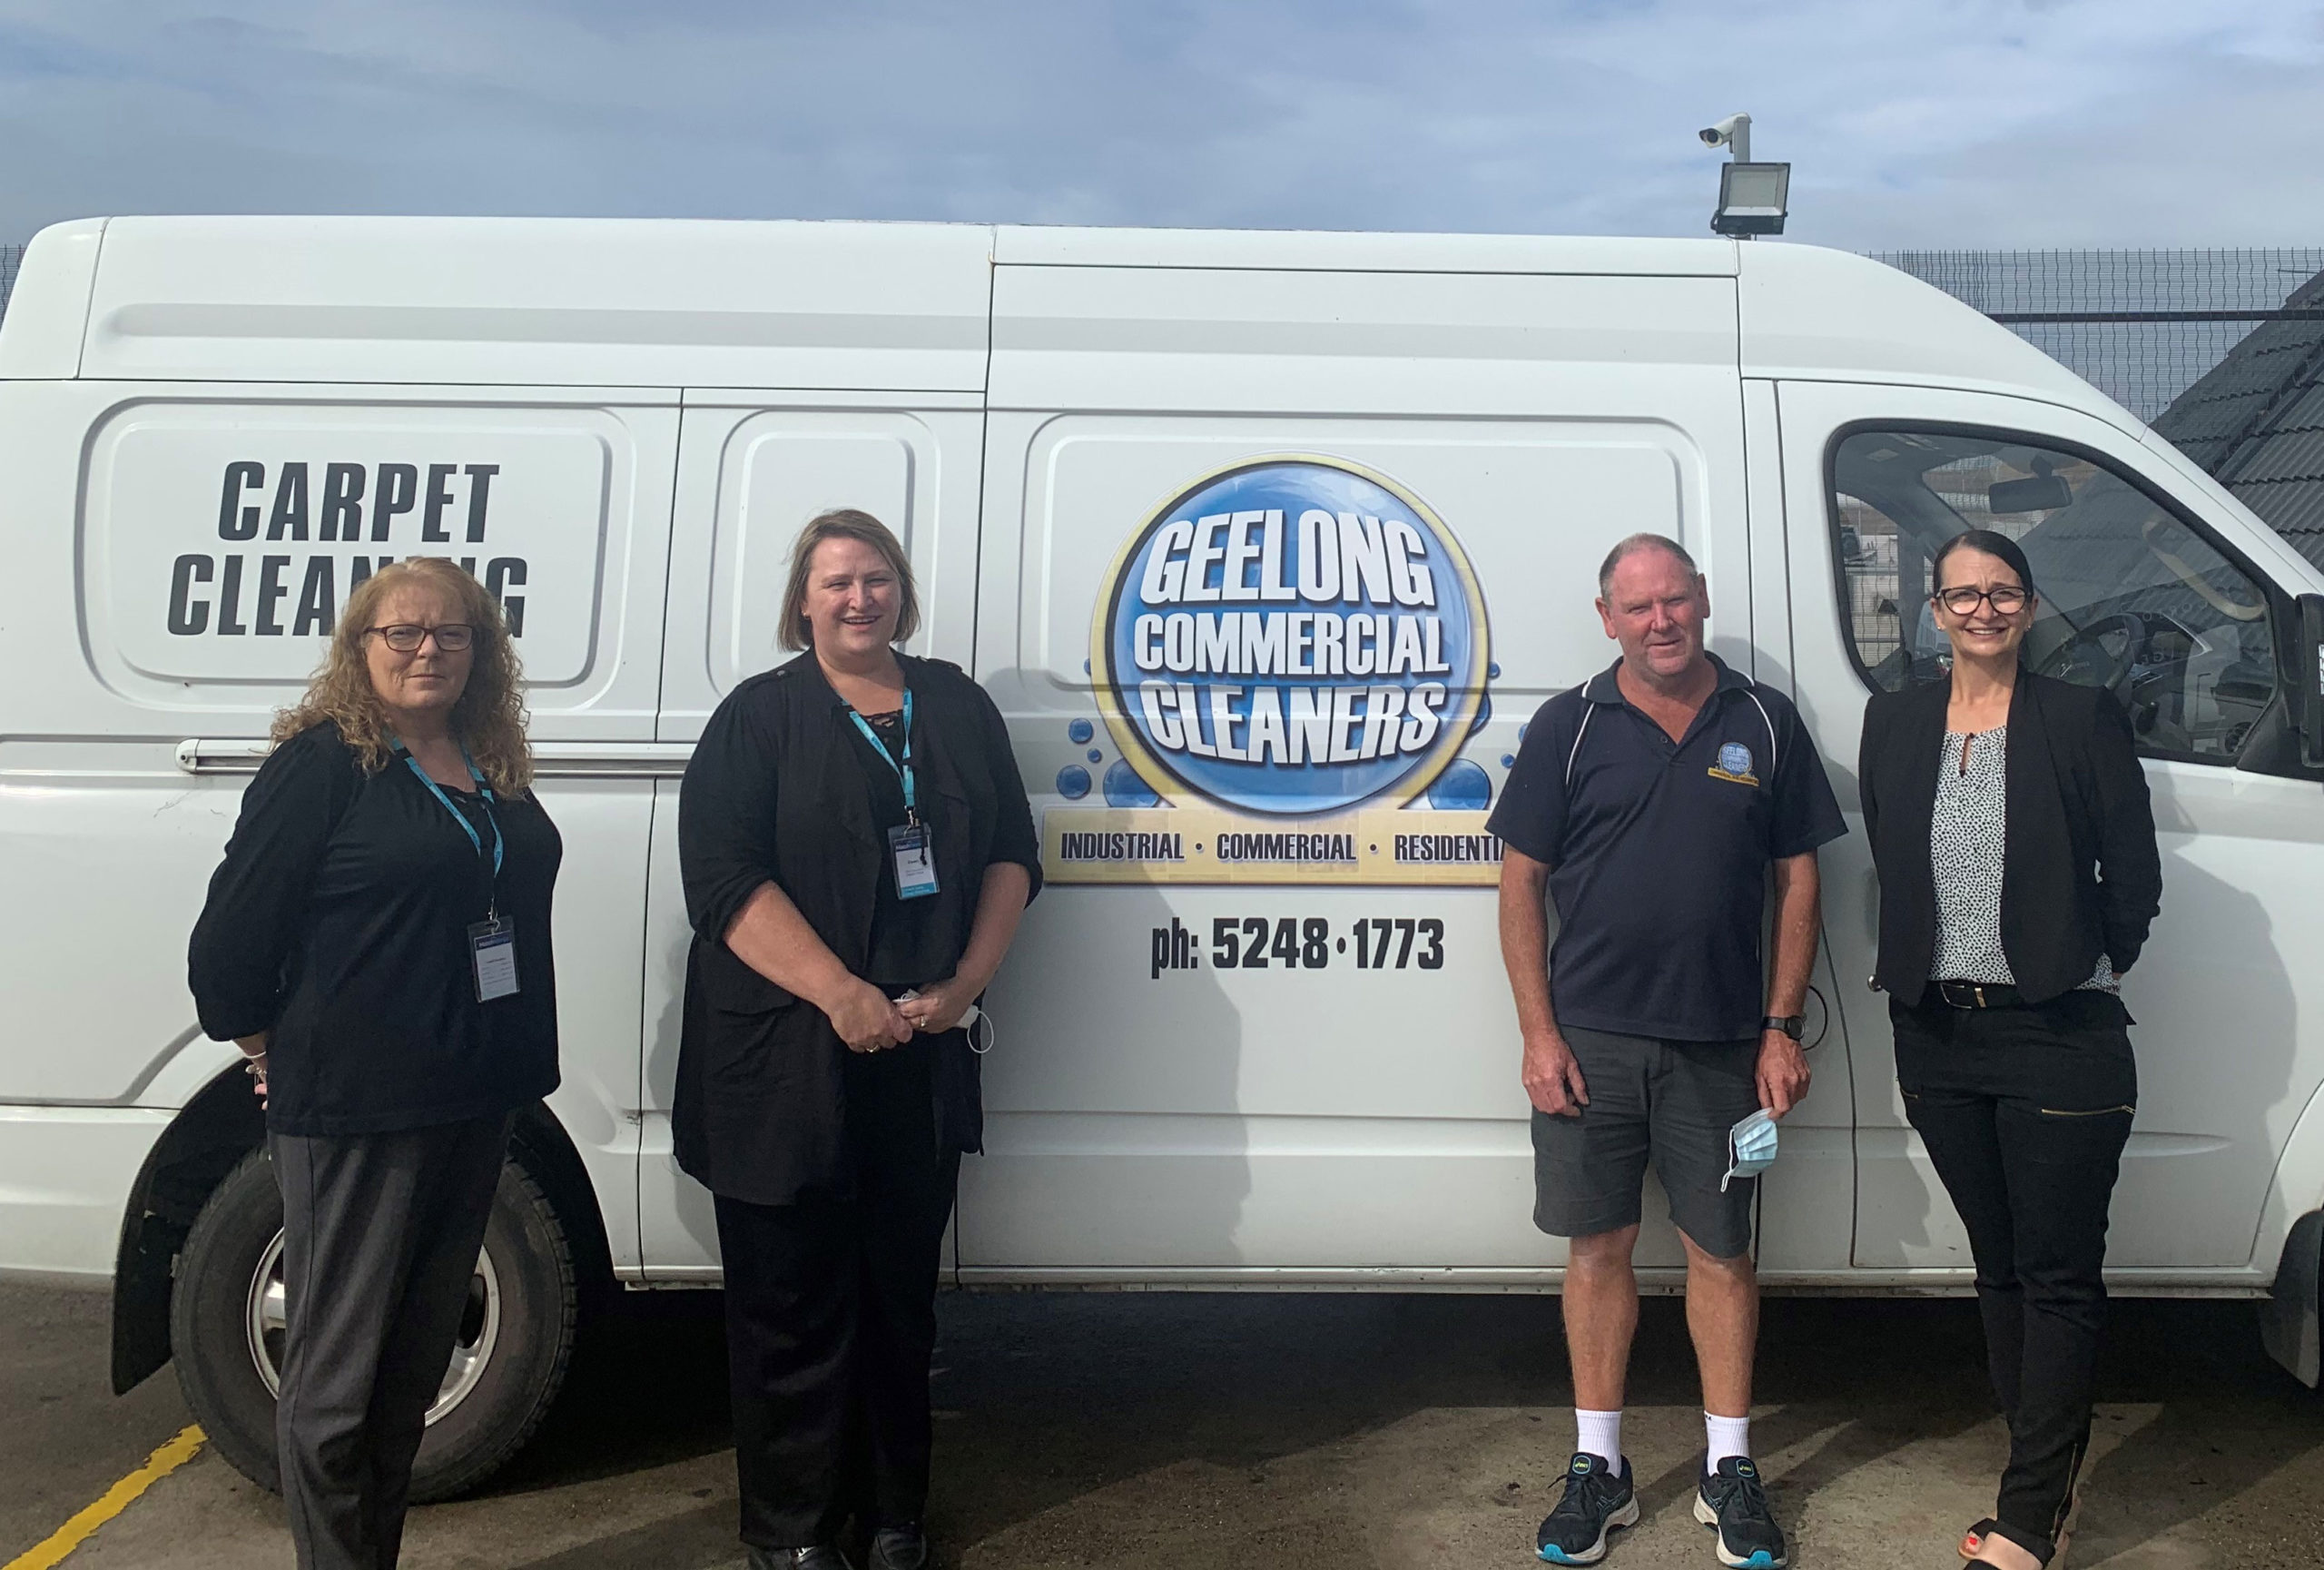 Group of employees standing next to Geelong Commercial Cleaners van